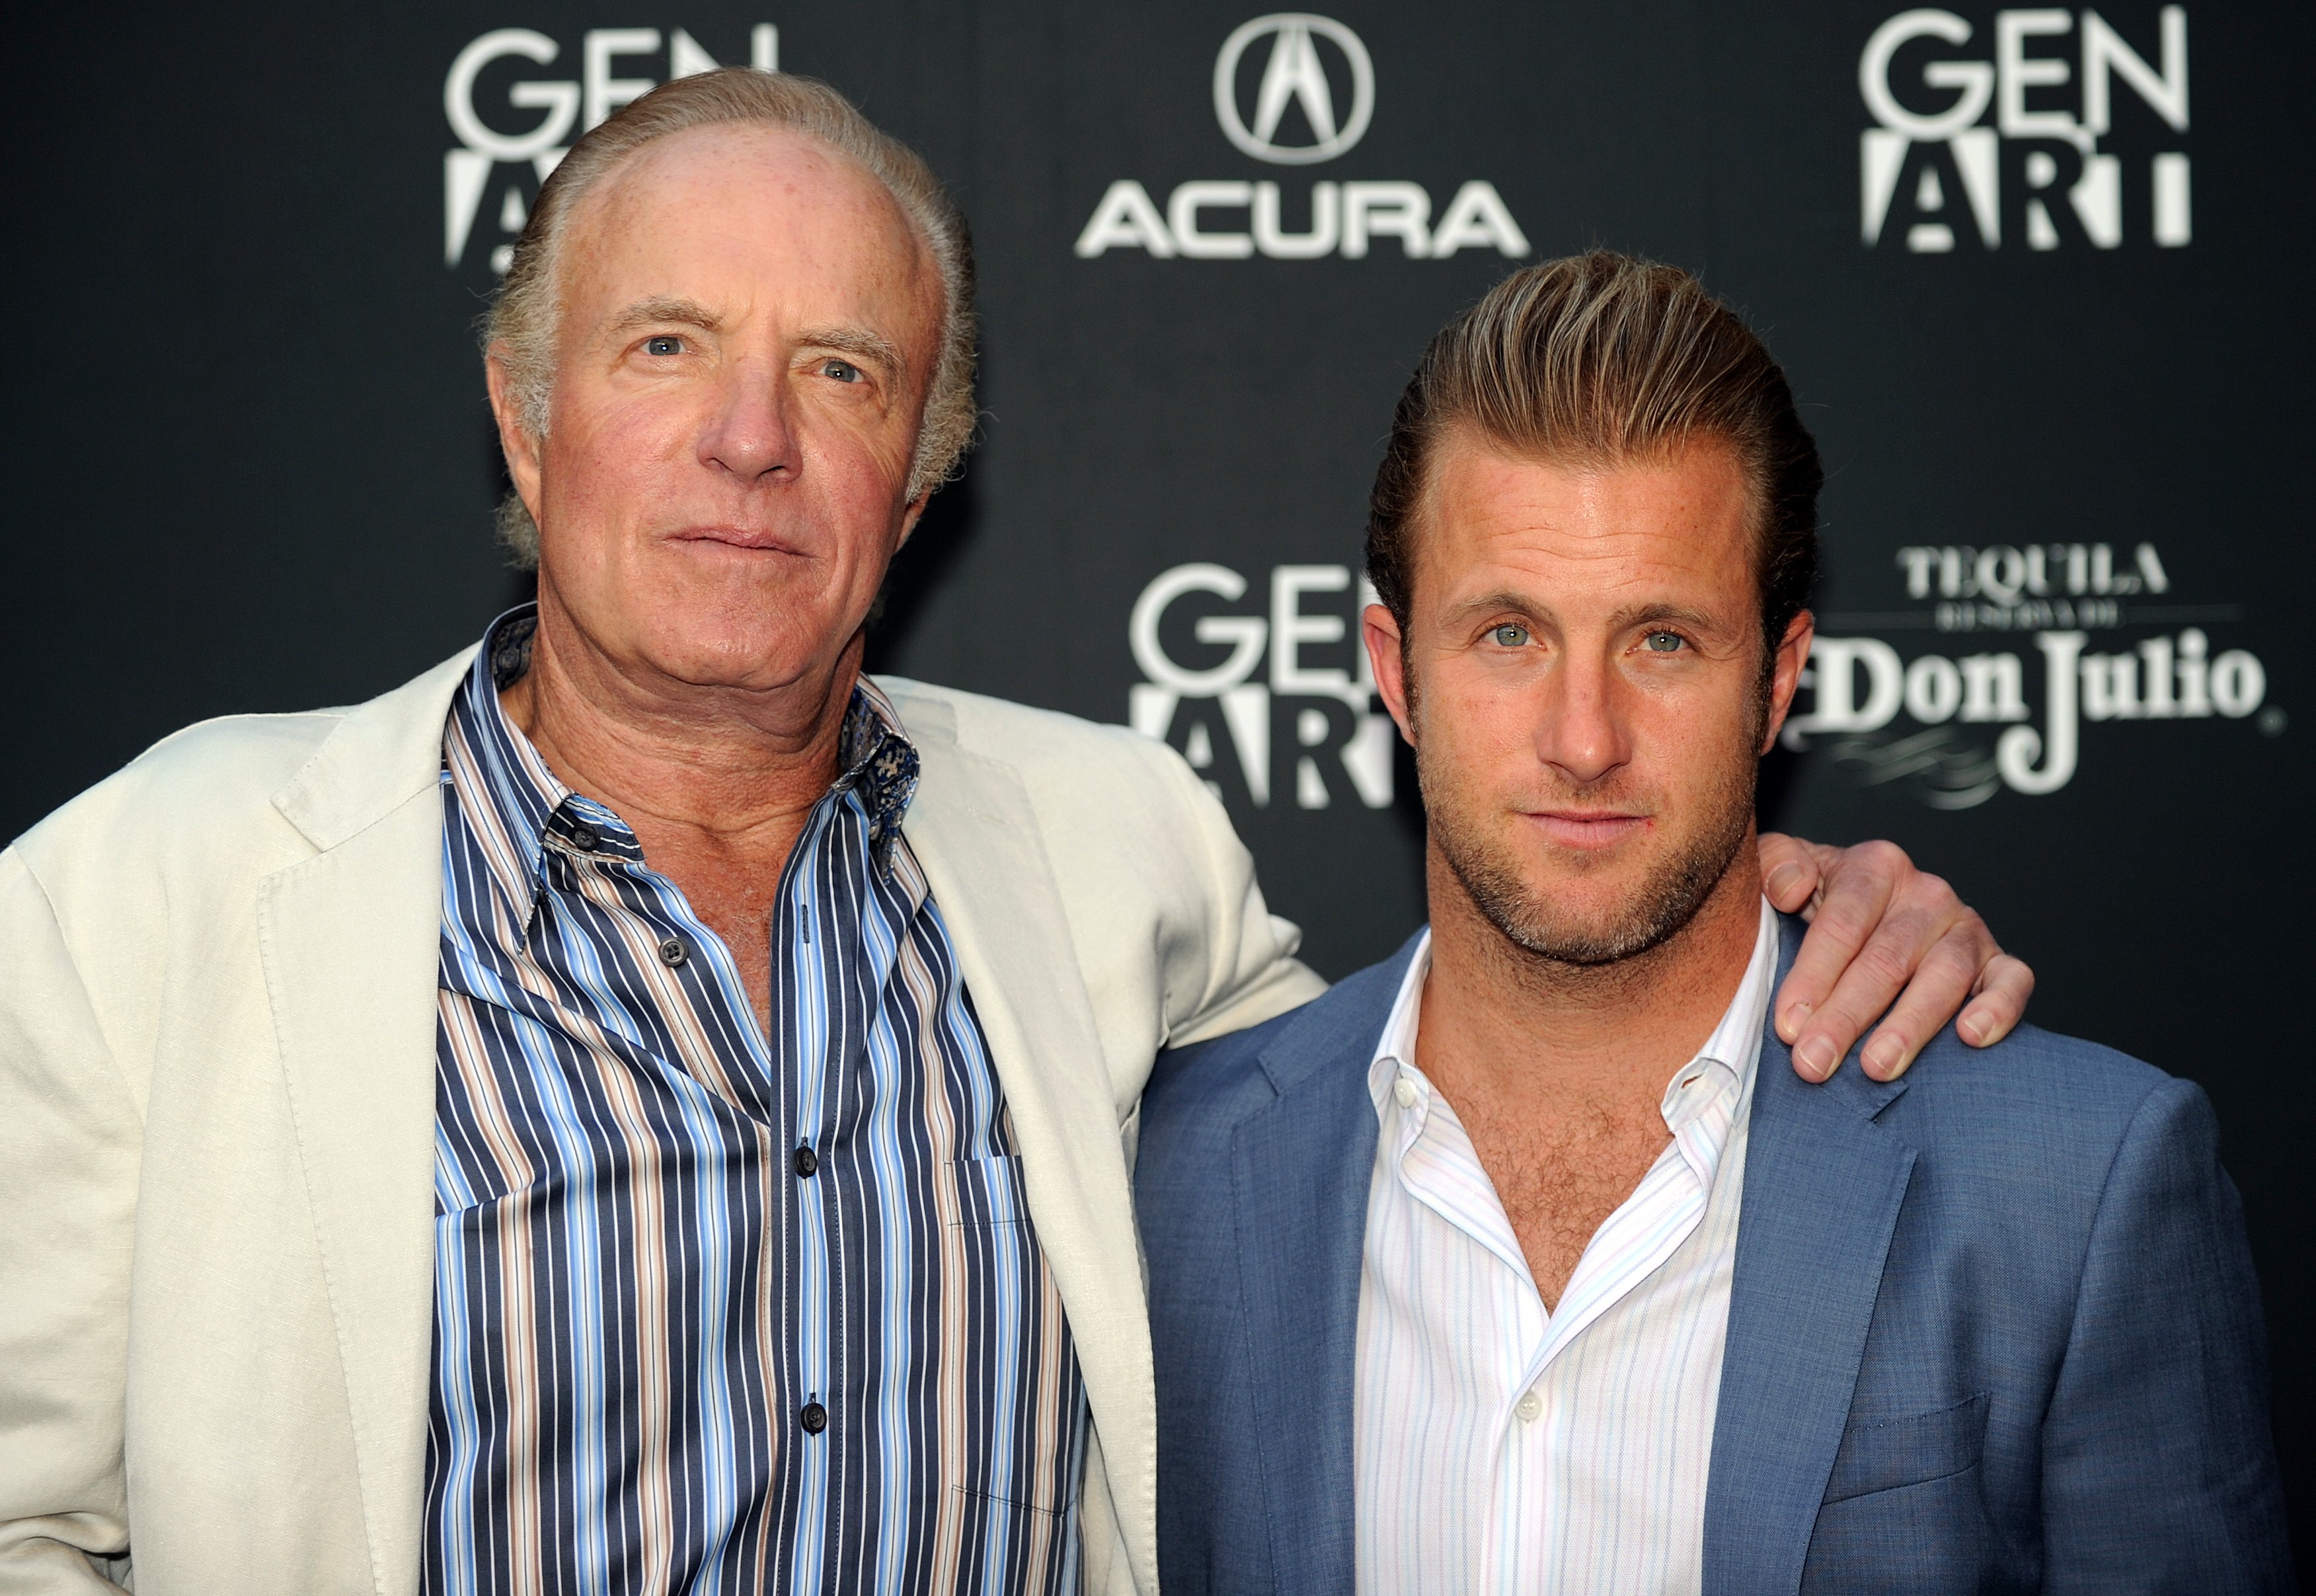  James Caan and his son Scott Caan Jr. arriving at the premiere of "Mercy" at the Egyptian Theater on May 3, 2010 in Hollywood, California. / Source: Getty Images